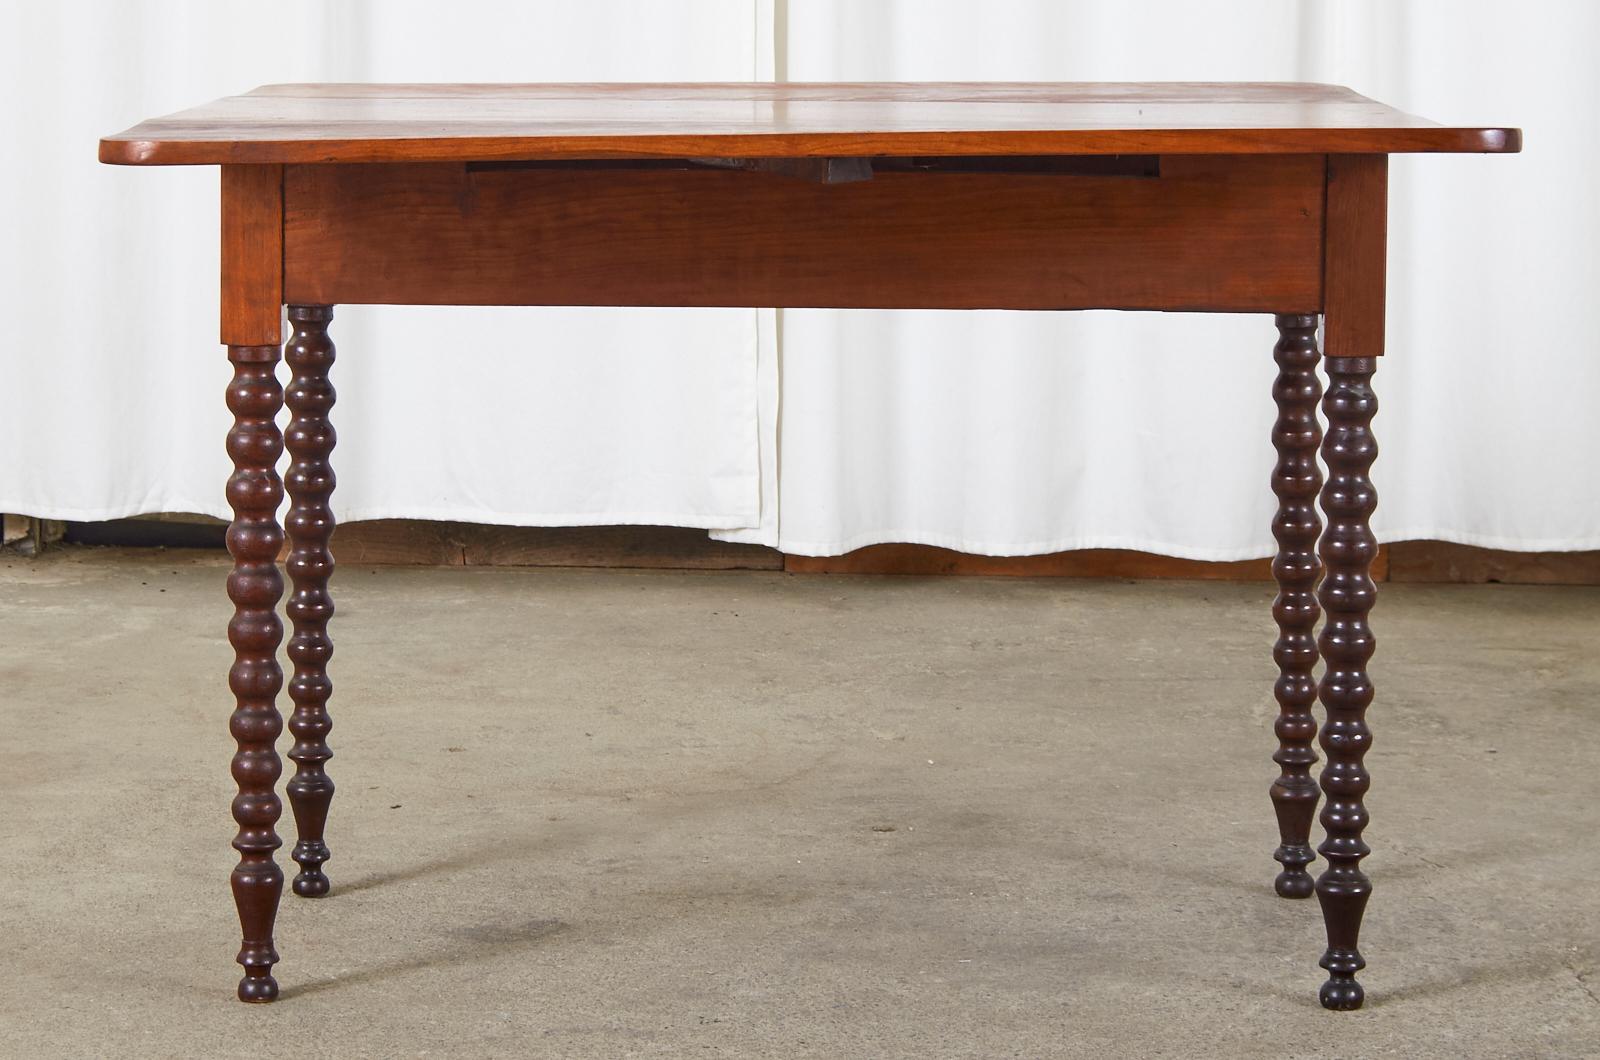 English William IV Mahogany Drop Leaf Dining Table or Pembroke Table